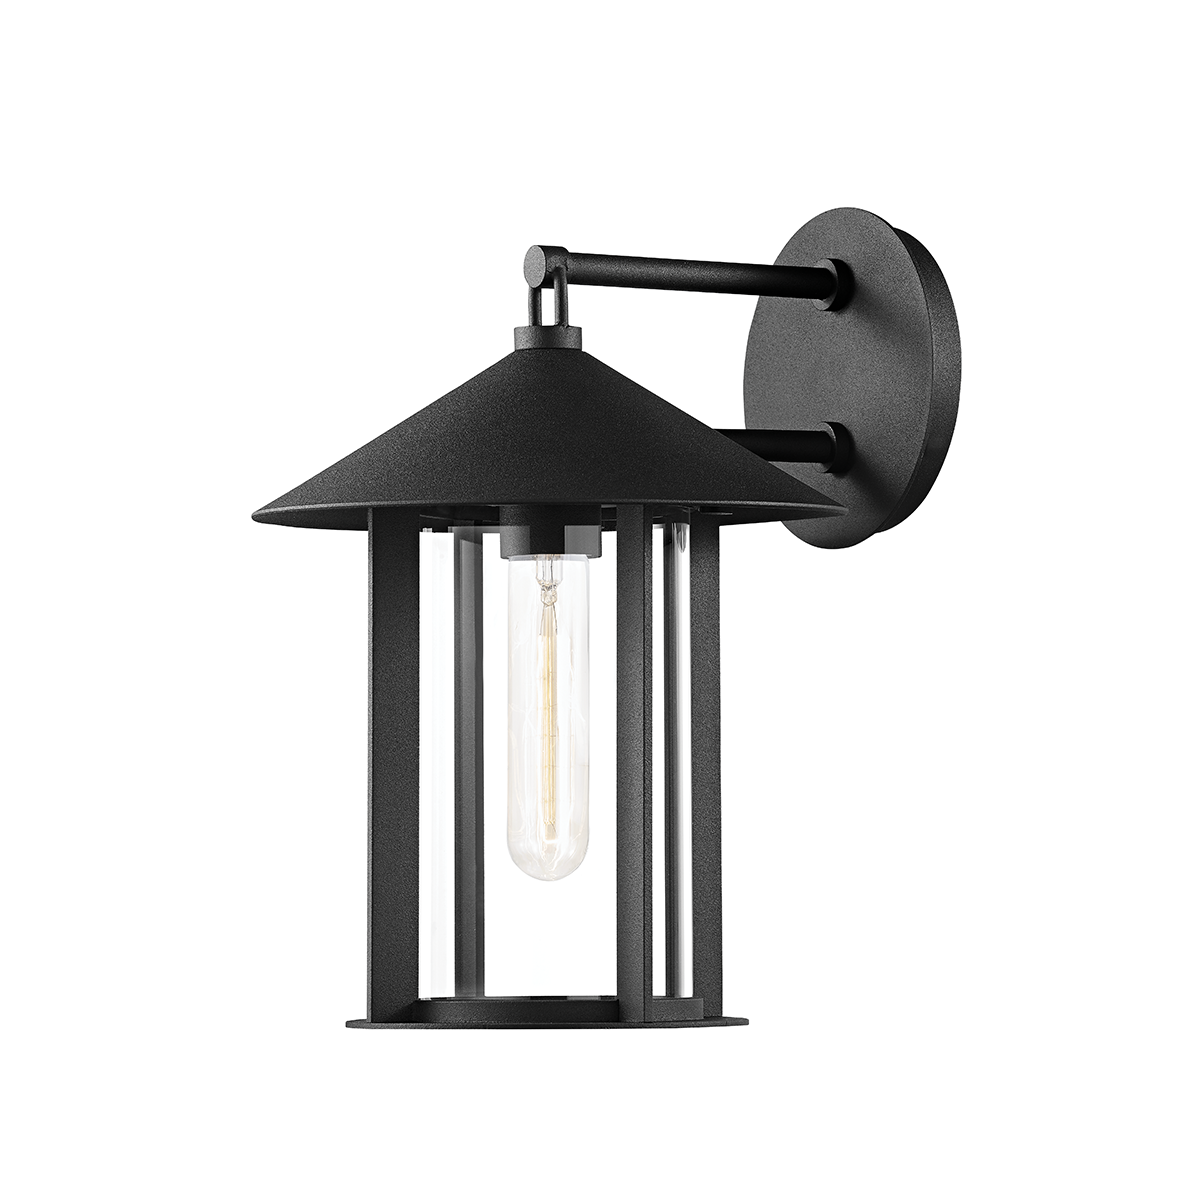 Troy Lighting 1 LIGHT EXTERIOR WALL SCONCE B1951 Outdoor l Wall Troy Lighting TEXTURE BLACK  